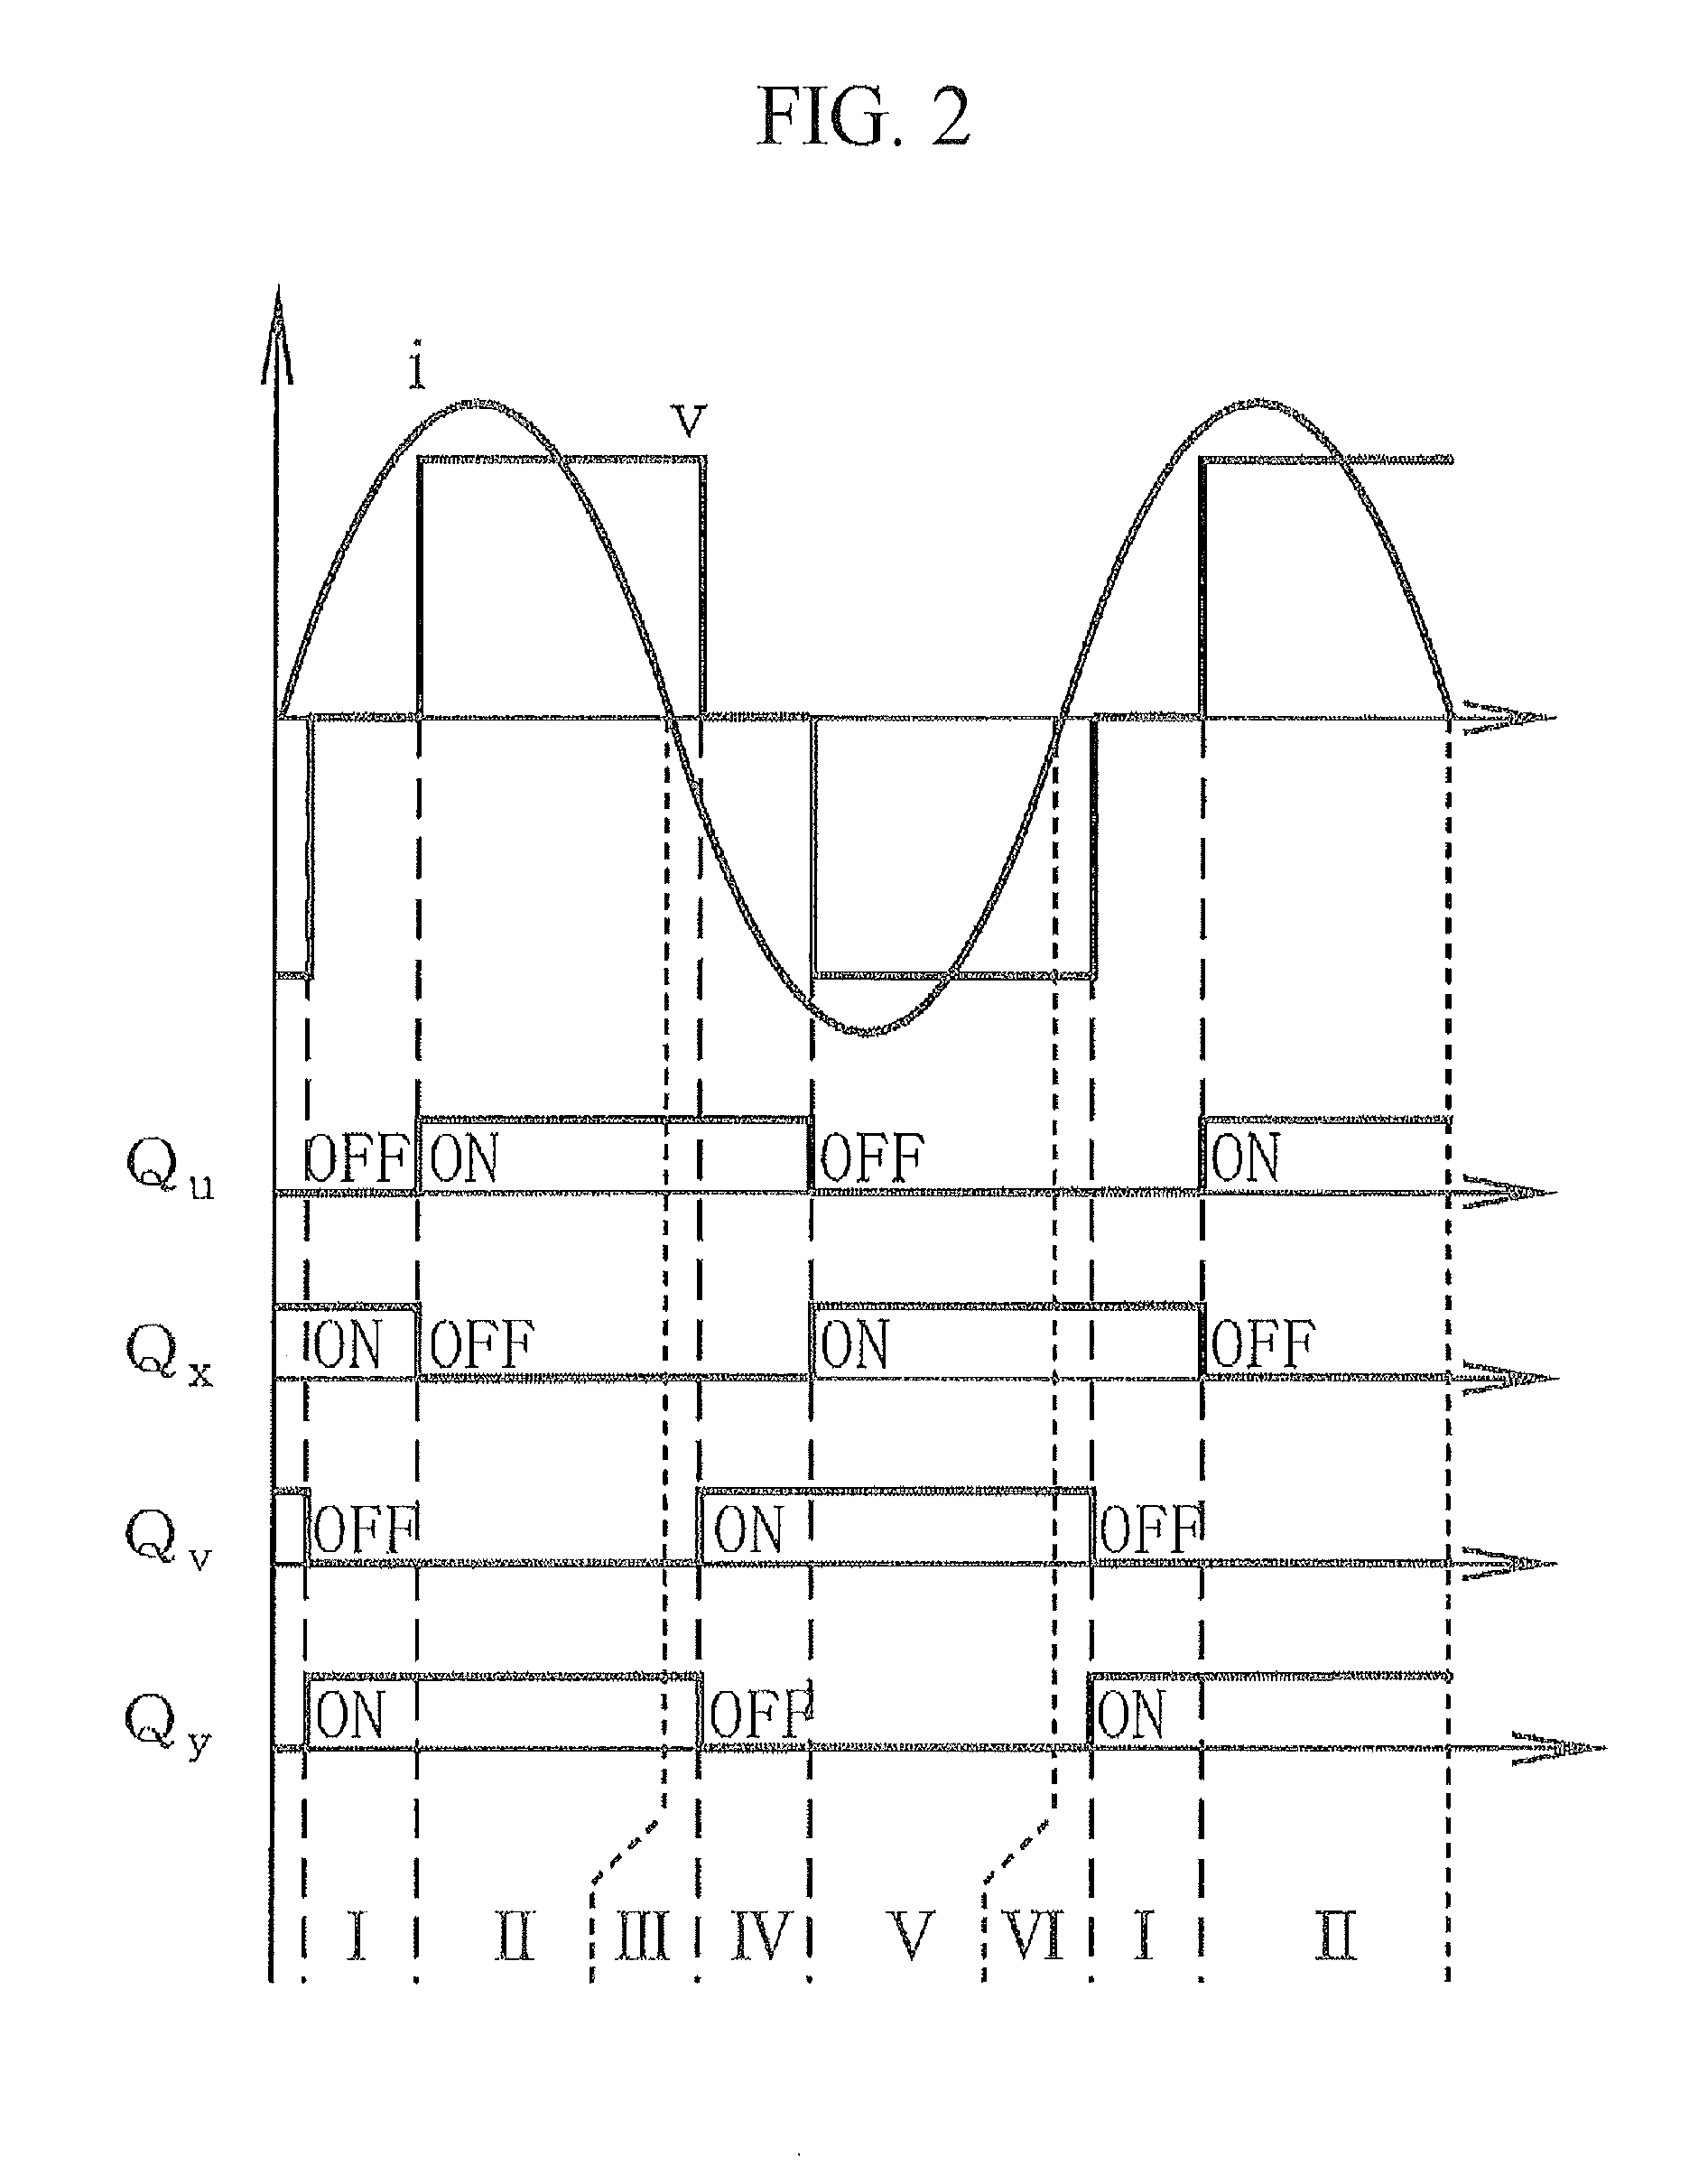 Contactless power transfer system and control method thereof